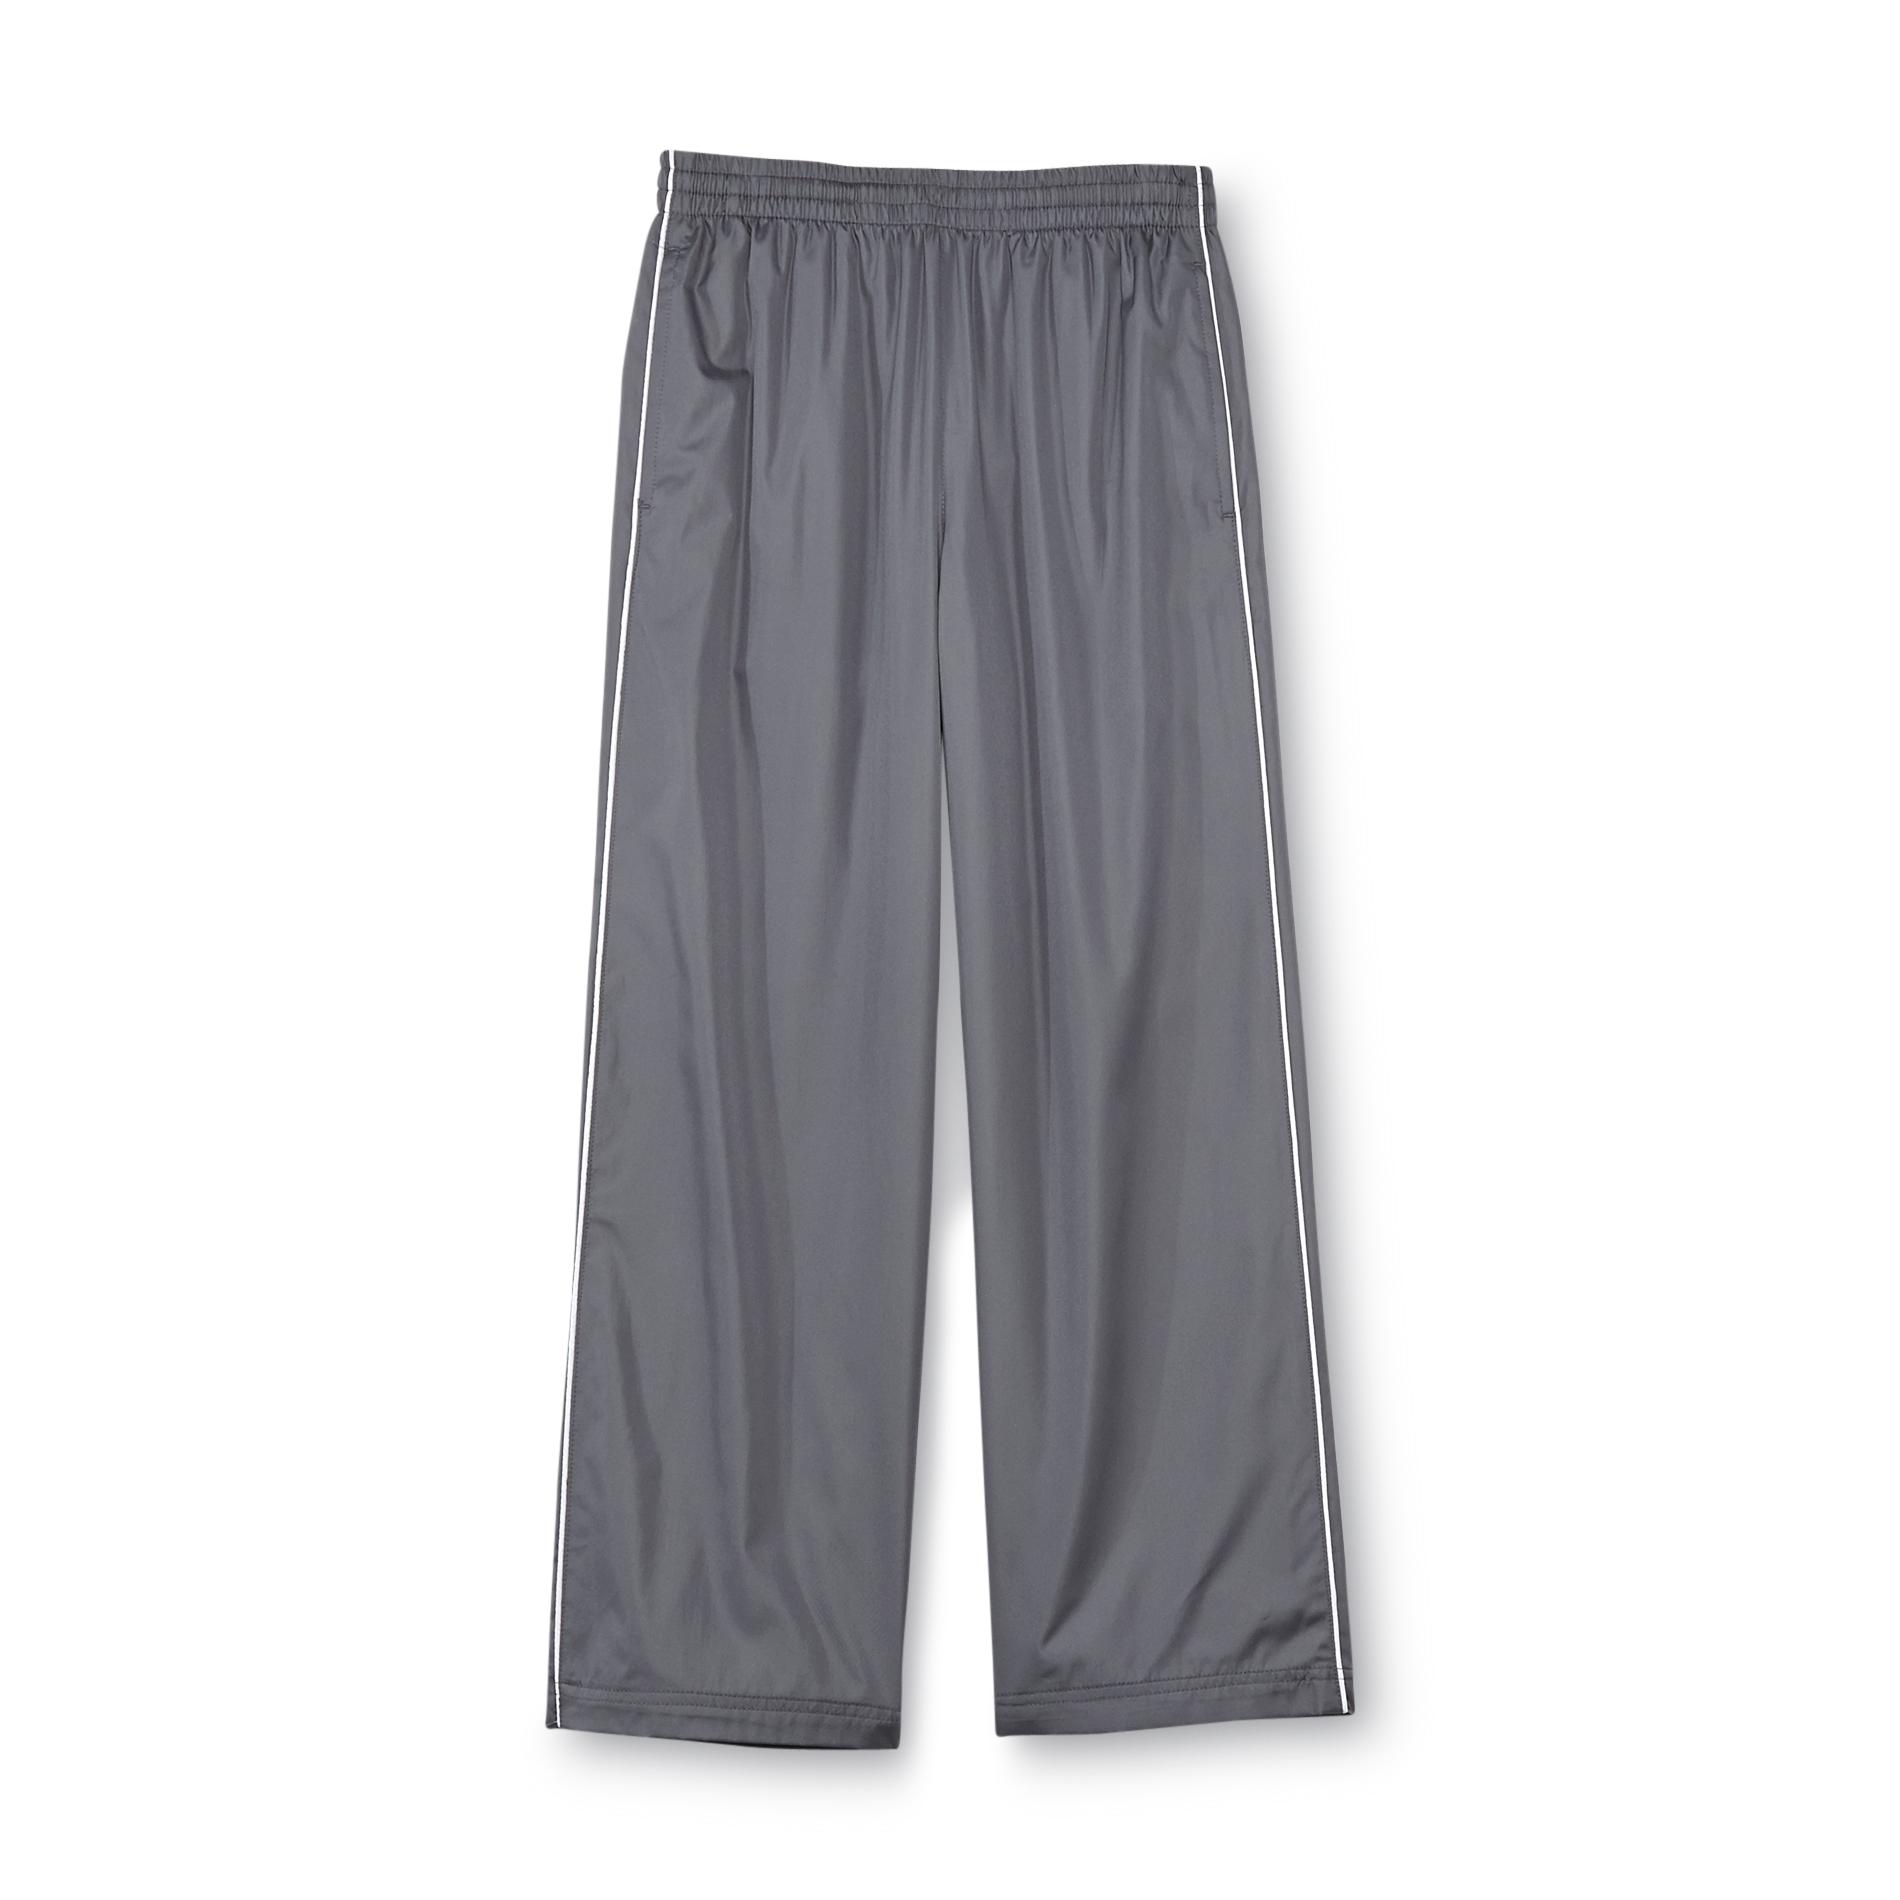 Athletech Boy's Mesh-Lined Athletic Pants